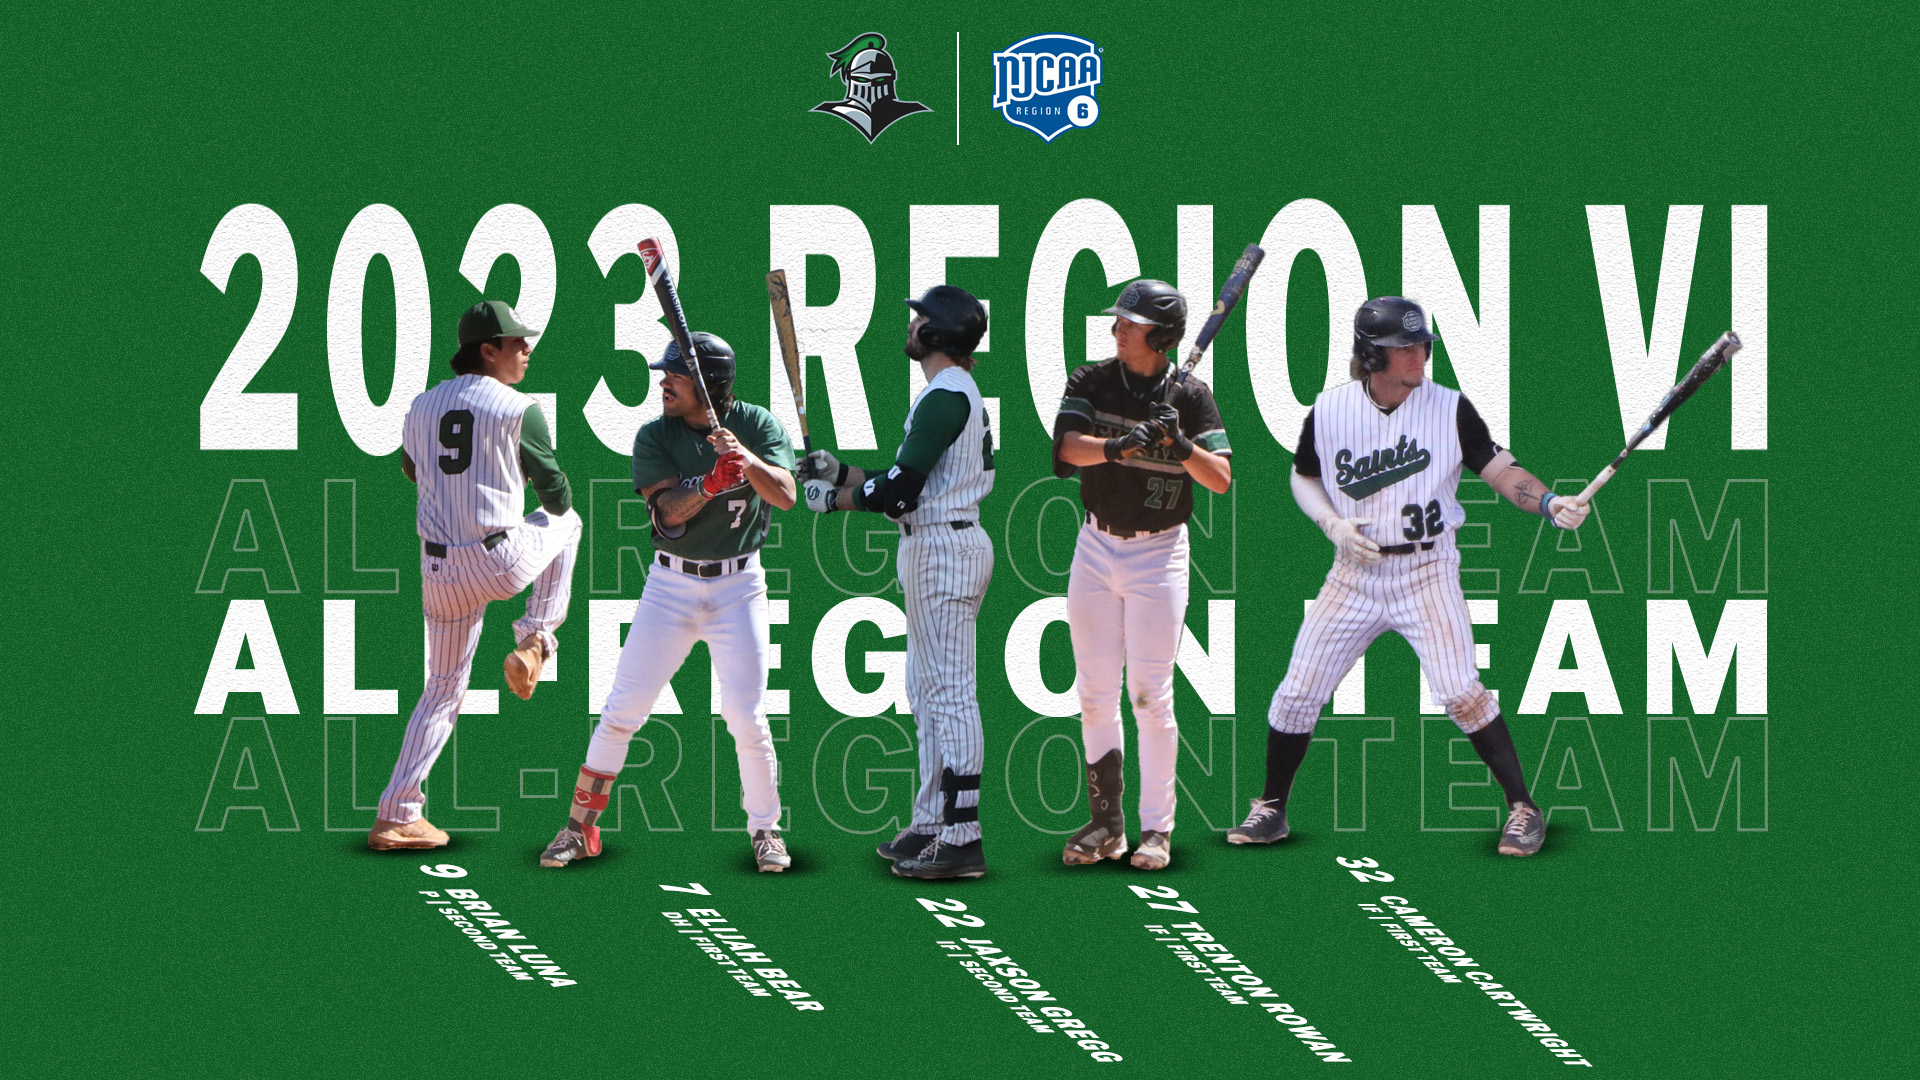 Saints Atop the Region with 5 All Region Players